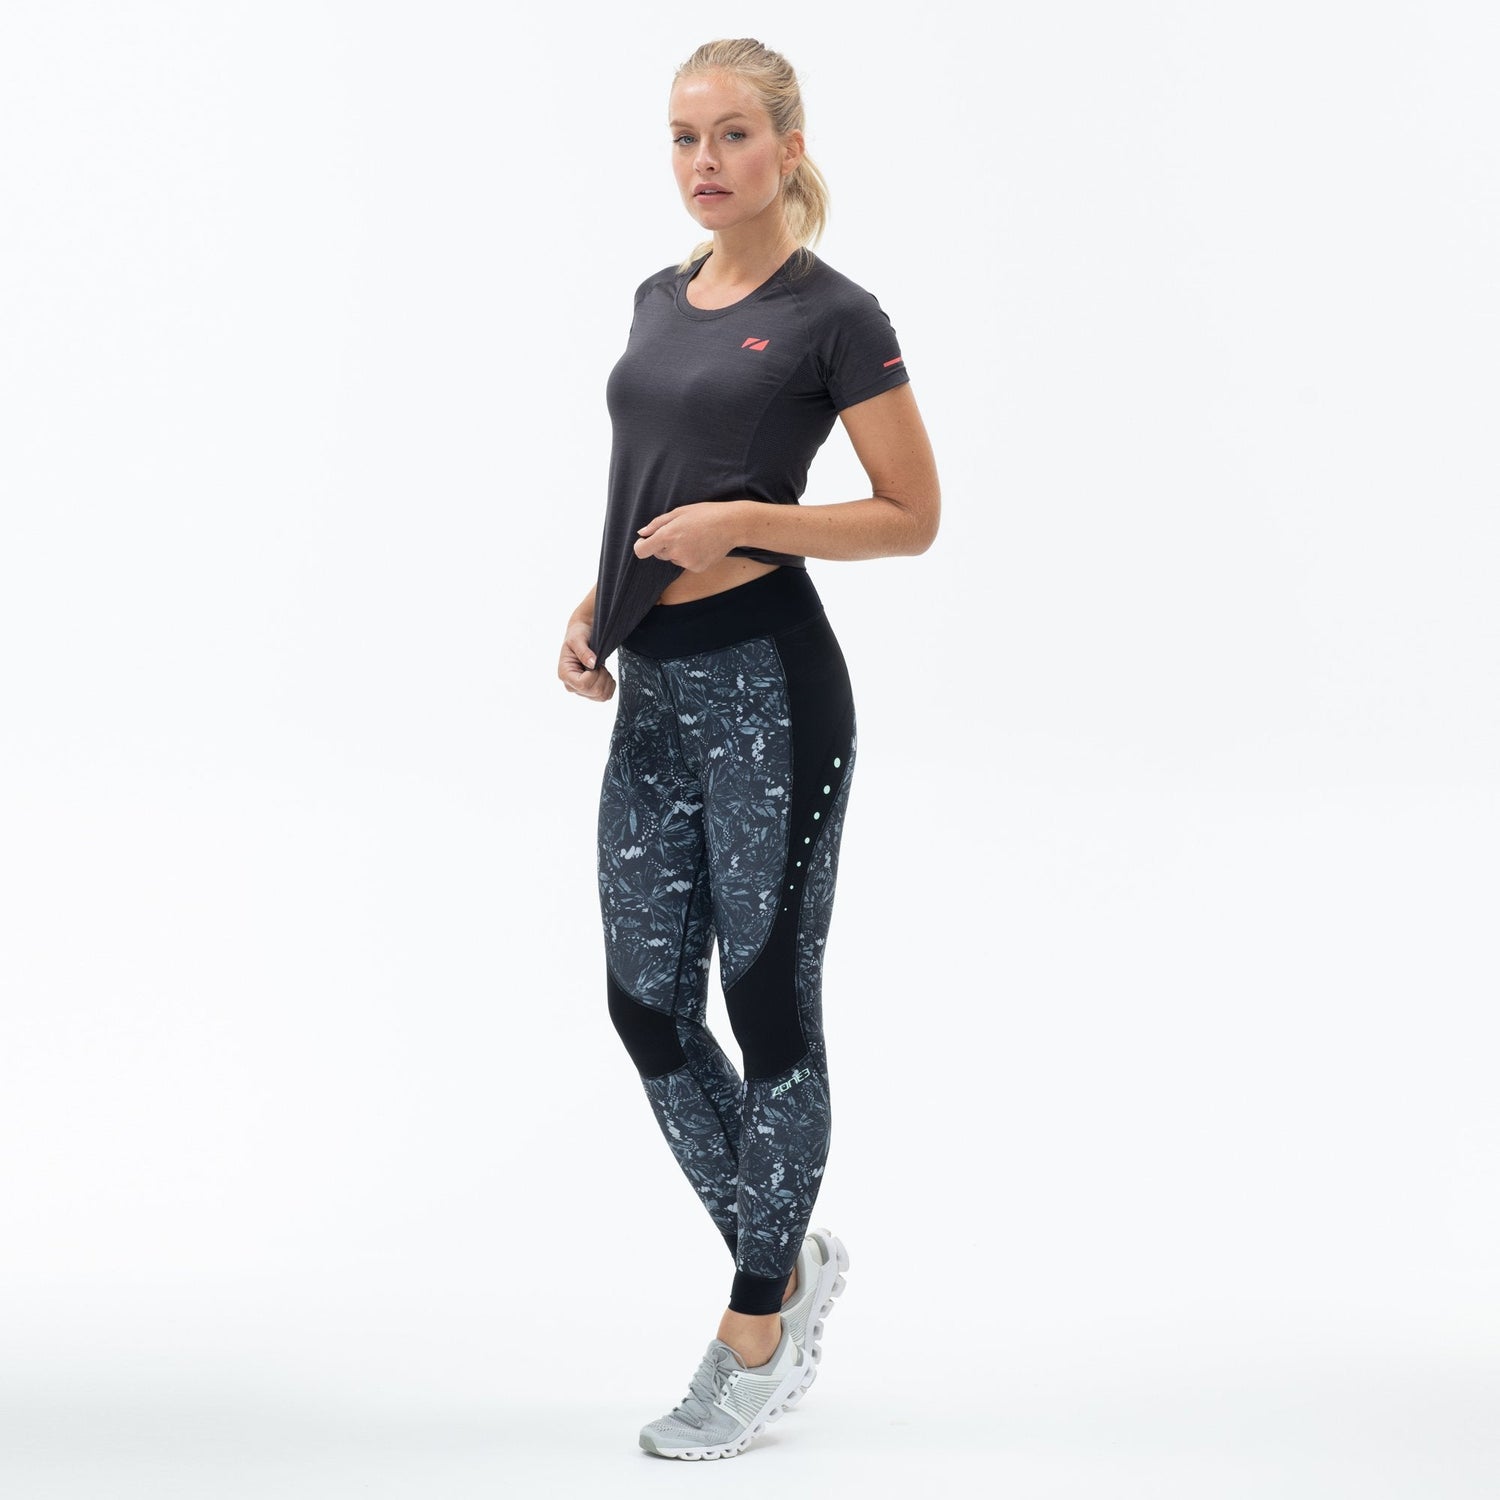 Zone3, RX3 Medical Grade Compression Tights, Performance Tights